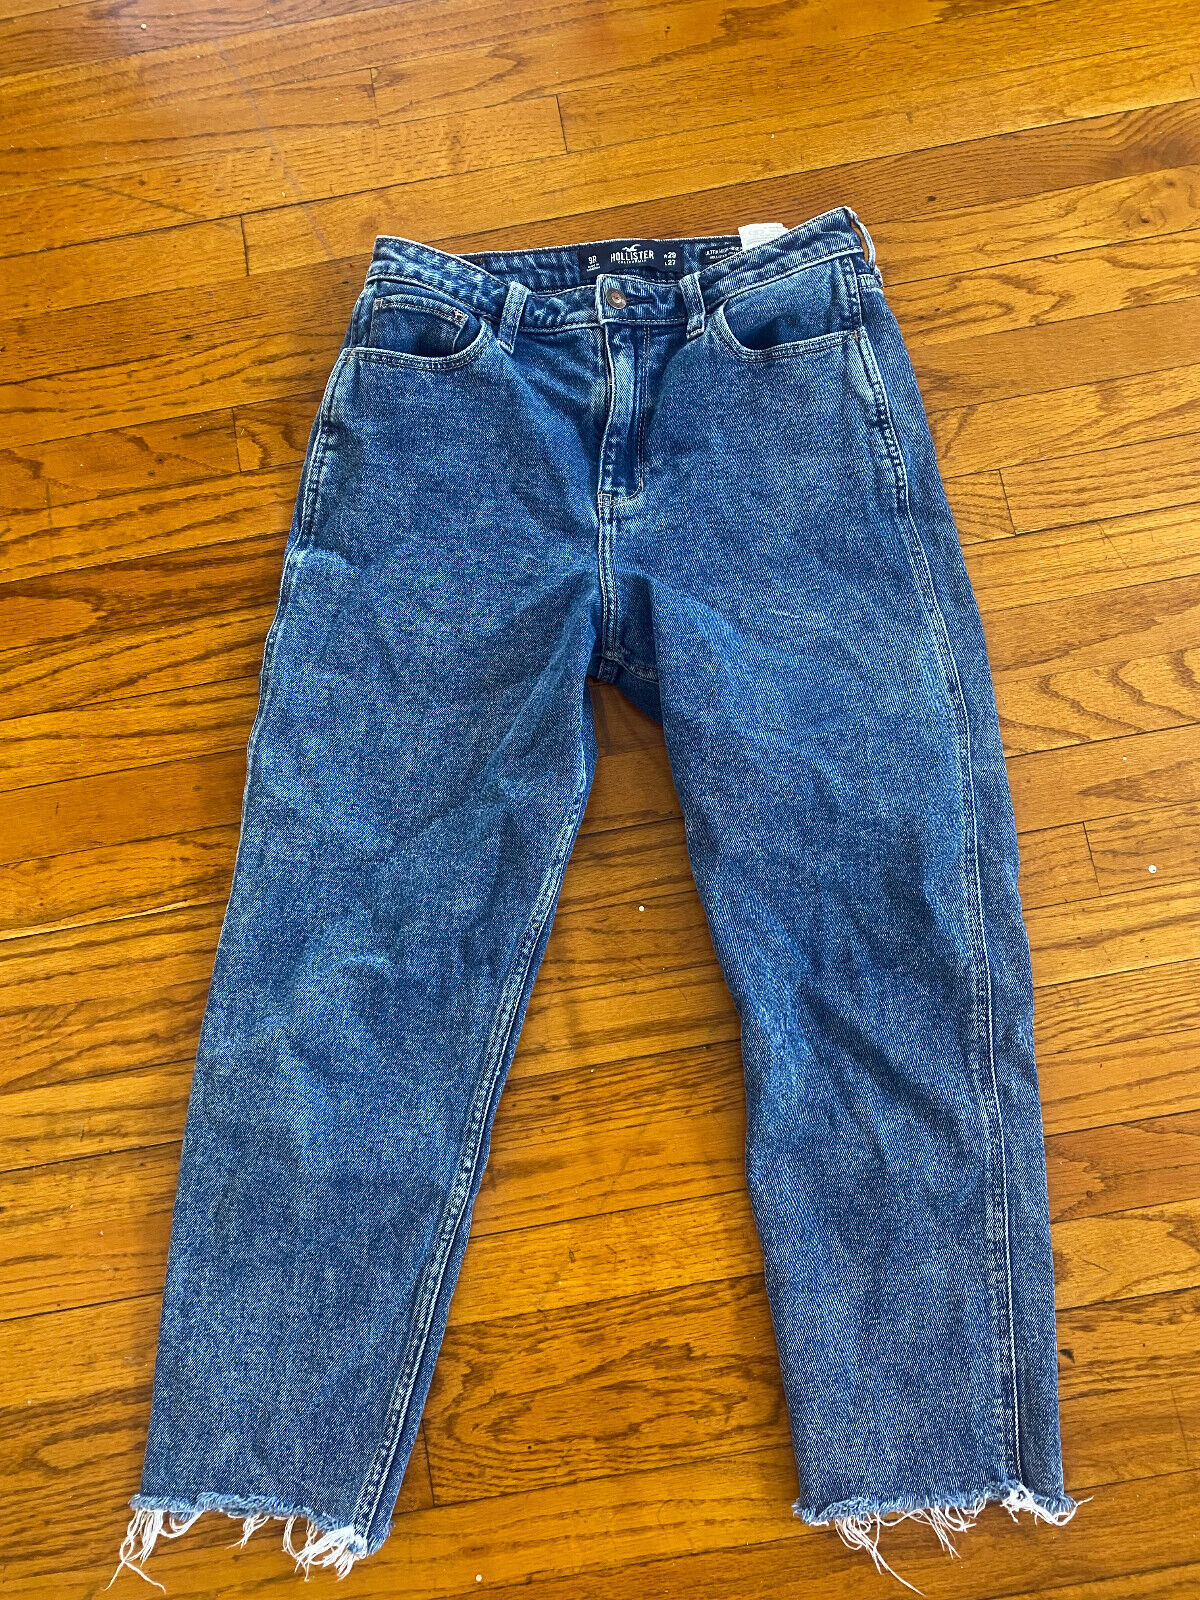 Blue High Rise Mom Jeans - Hollister - Size 29